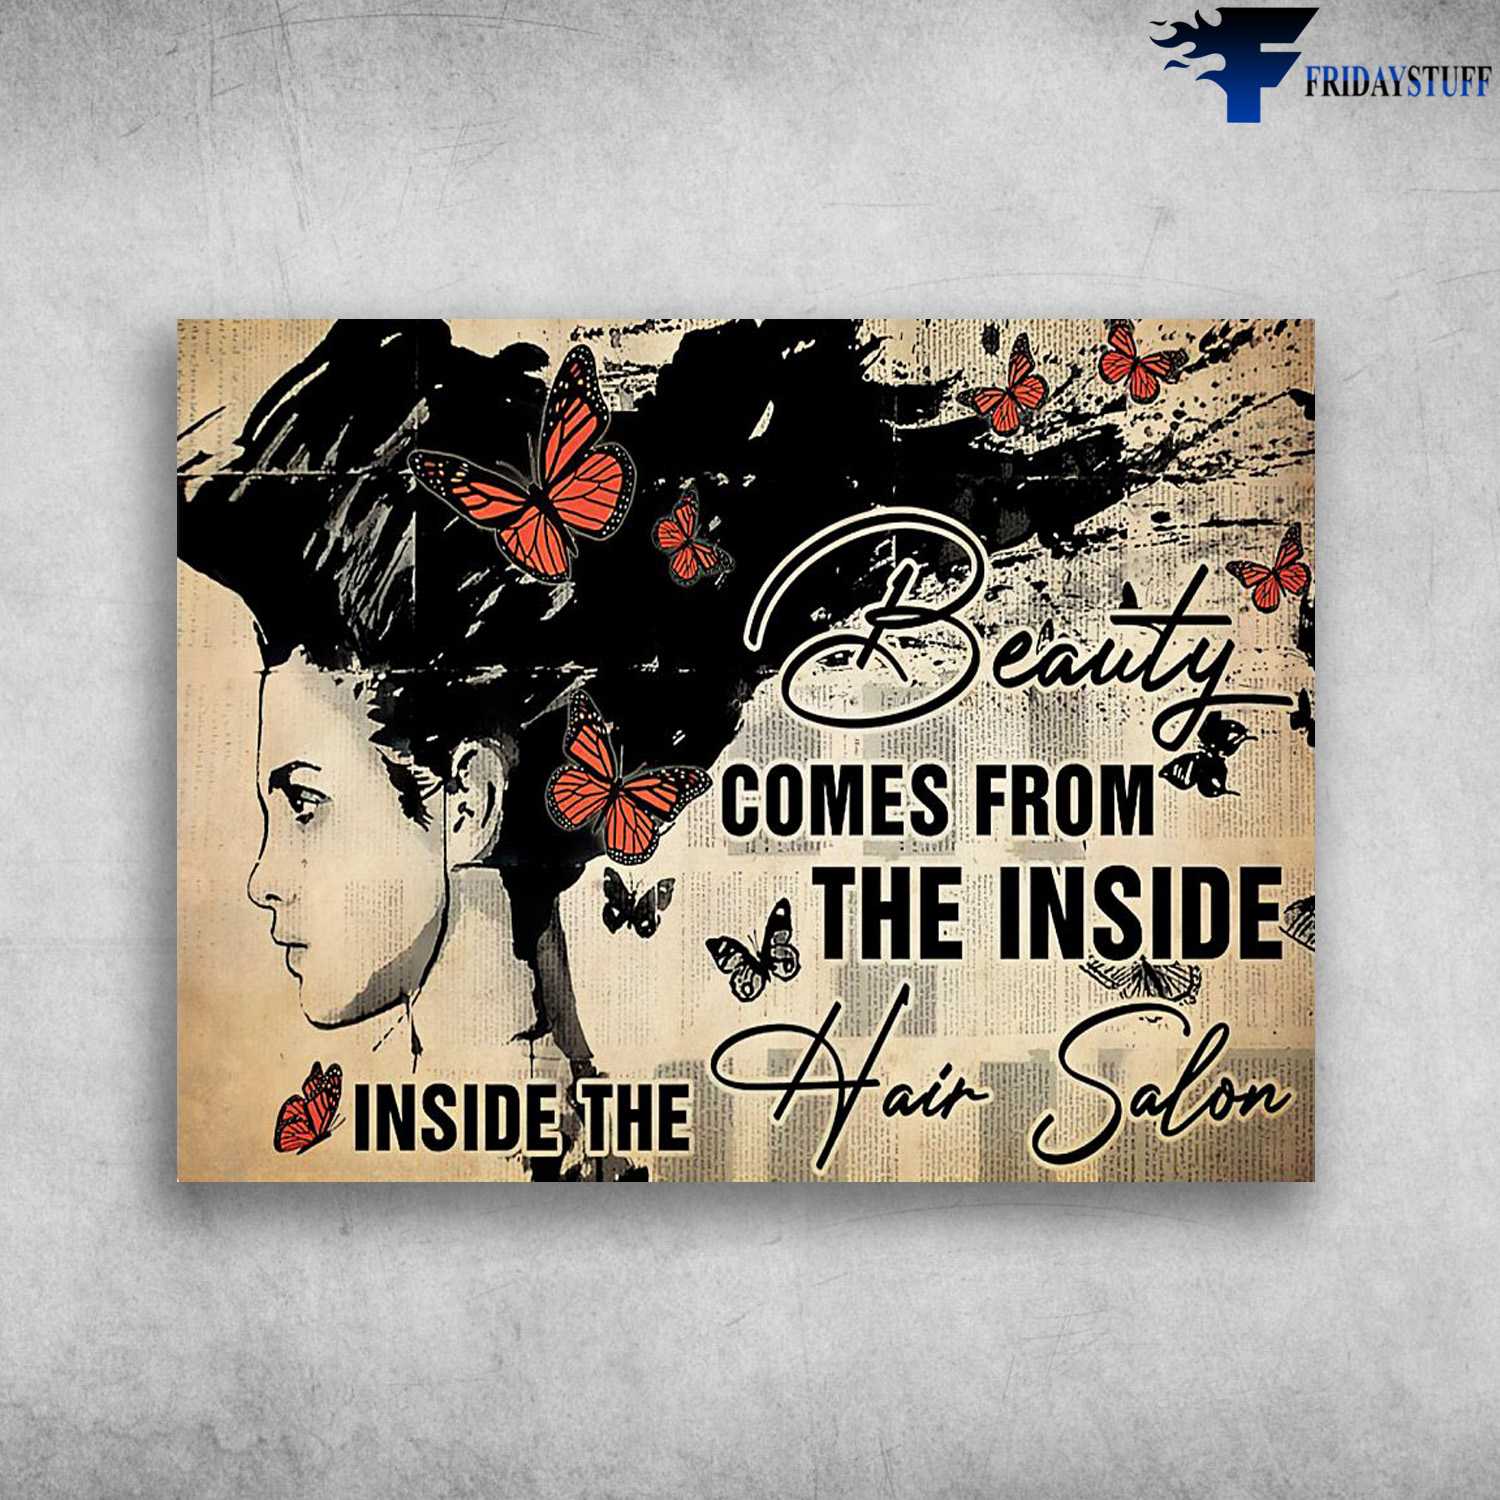 Hairdresser Poster, Buterfly Poster, Beauty Comes From The Inside, Inside The Hair Salon